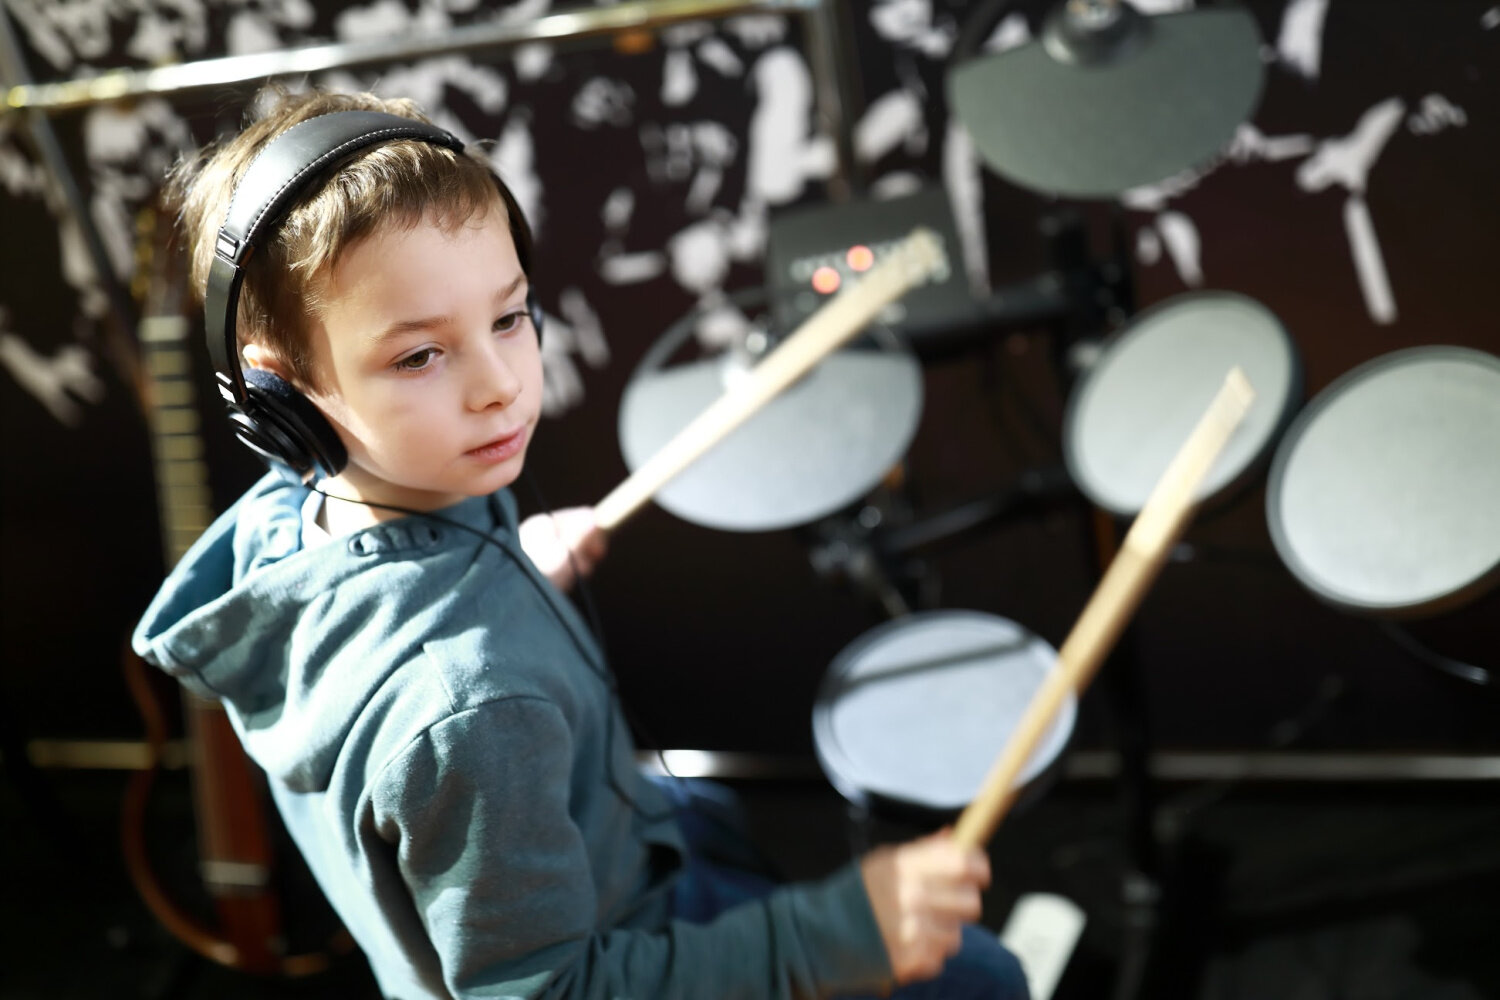   Drum Lessons   in Mendota Heights   for beginner, intermediate, and advanced students of all ages   CALL  651-263-9475  TO SCHEDULE YOUR FIRST LESSON   REQUEST INFO  